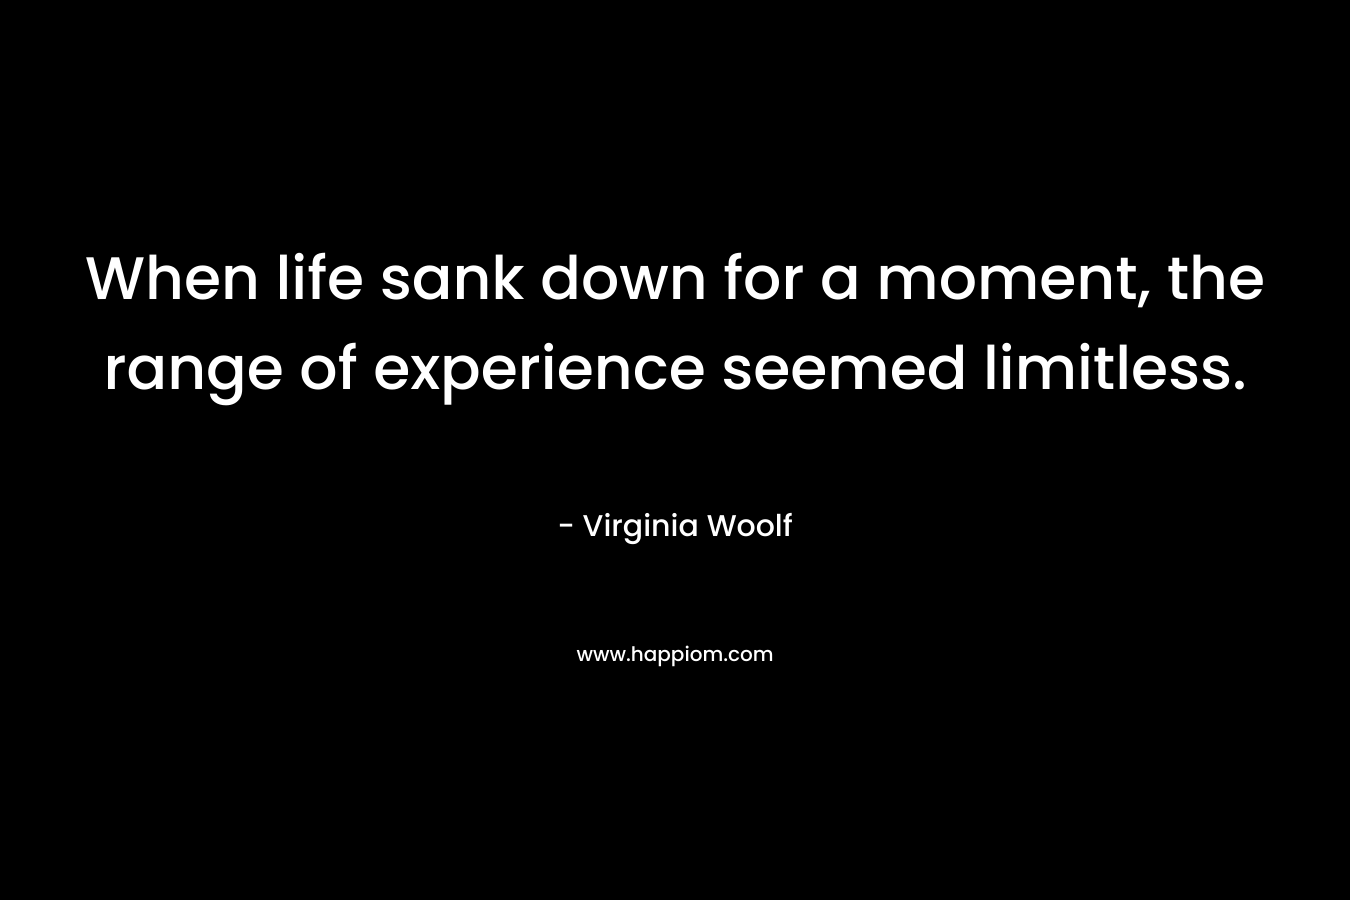 When life sank down for a moment, the range of experience seemed limitless. – Virginia Woolf